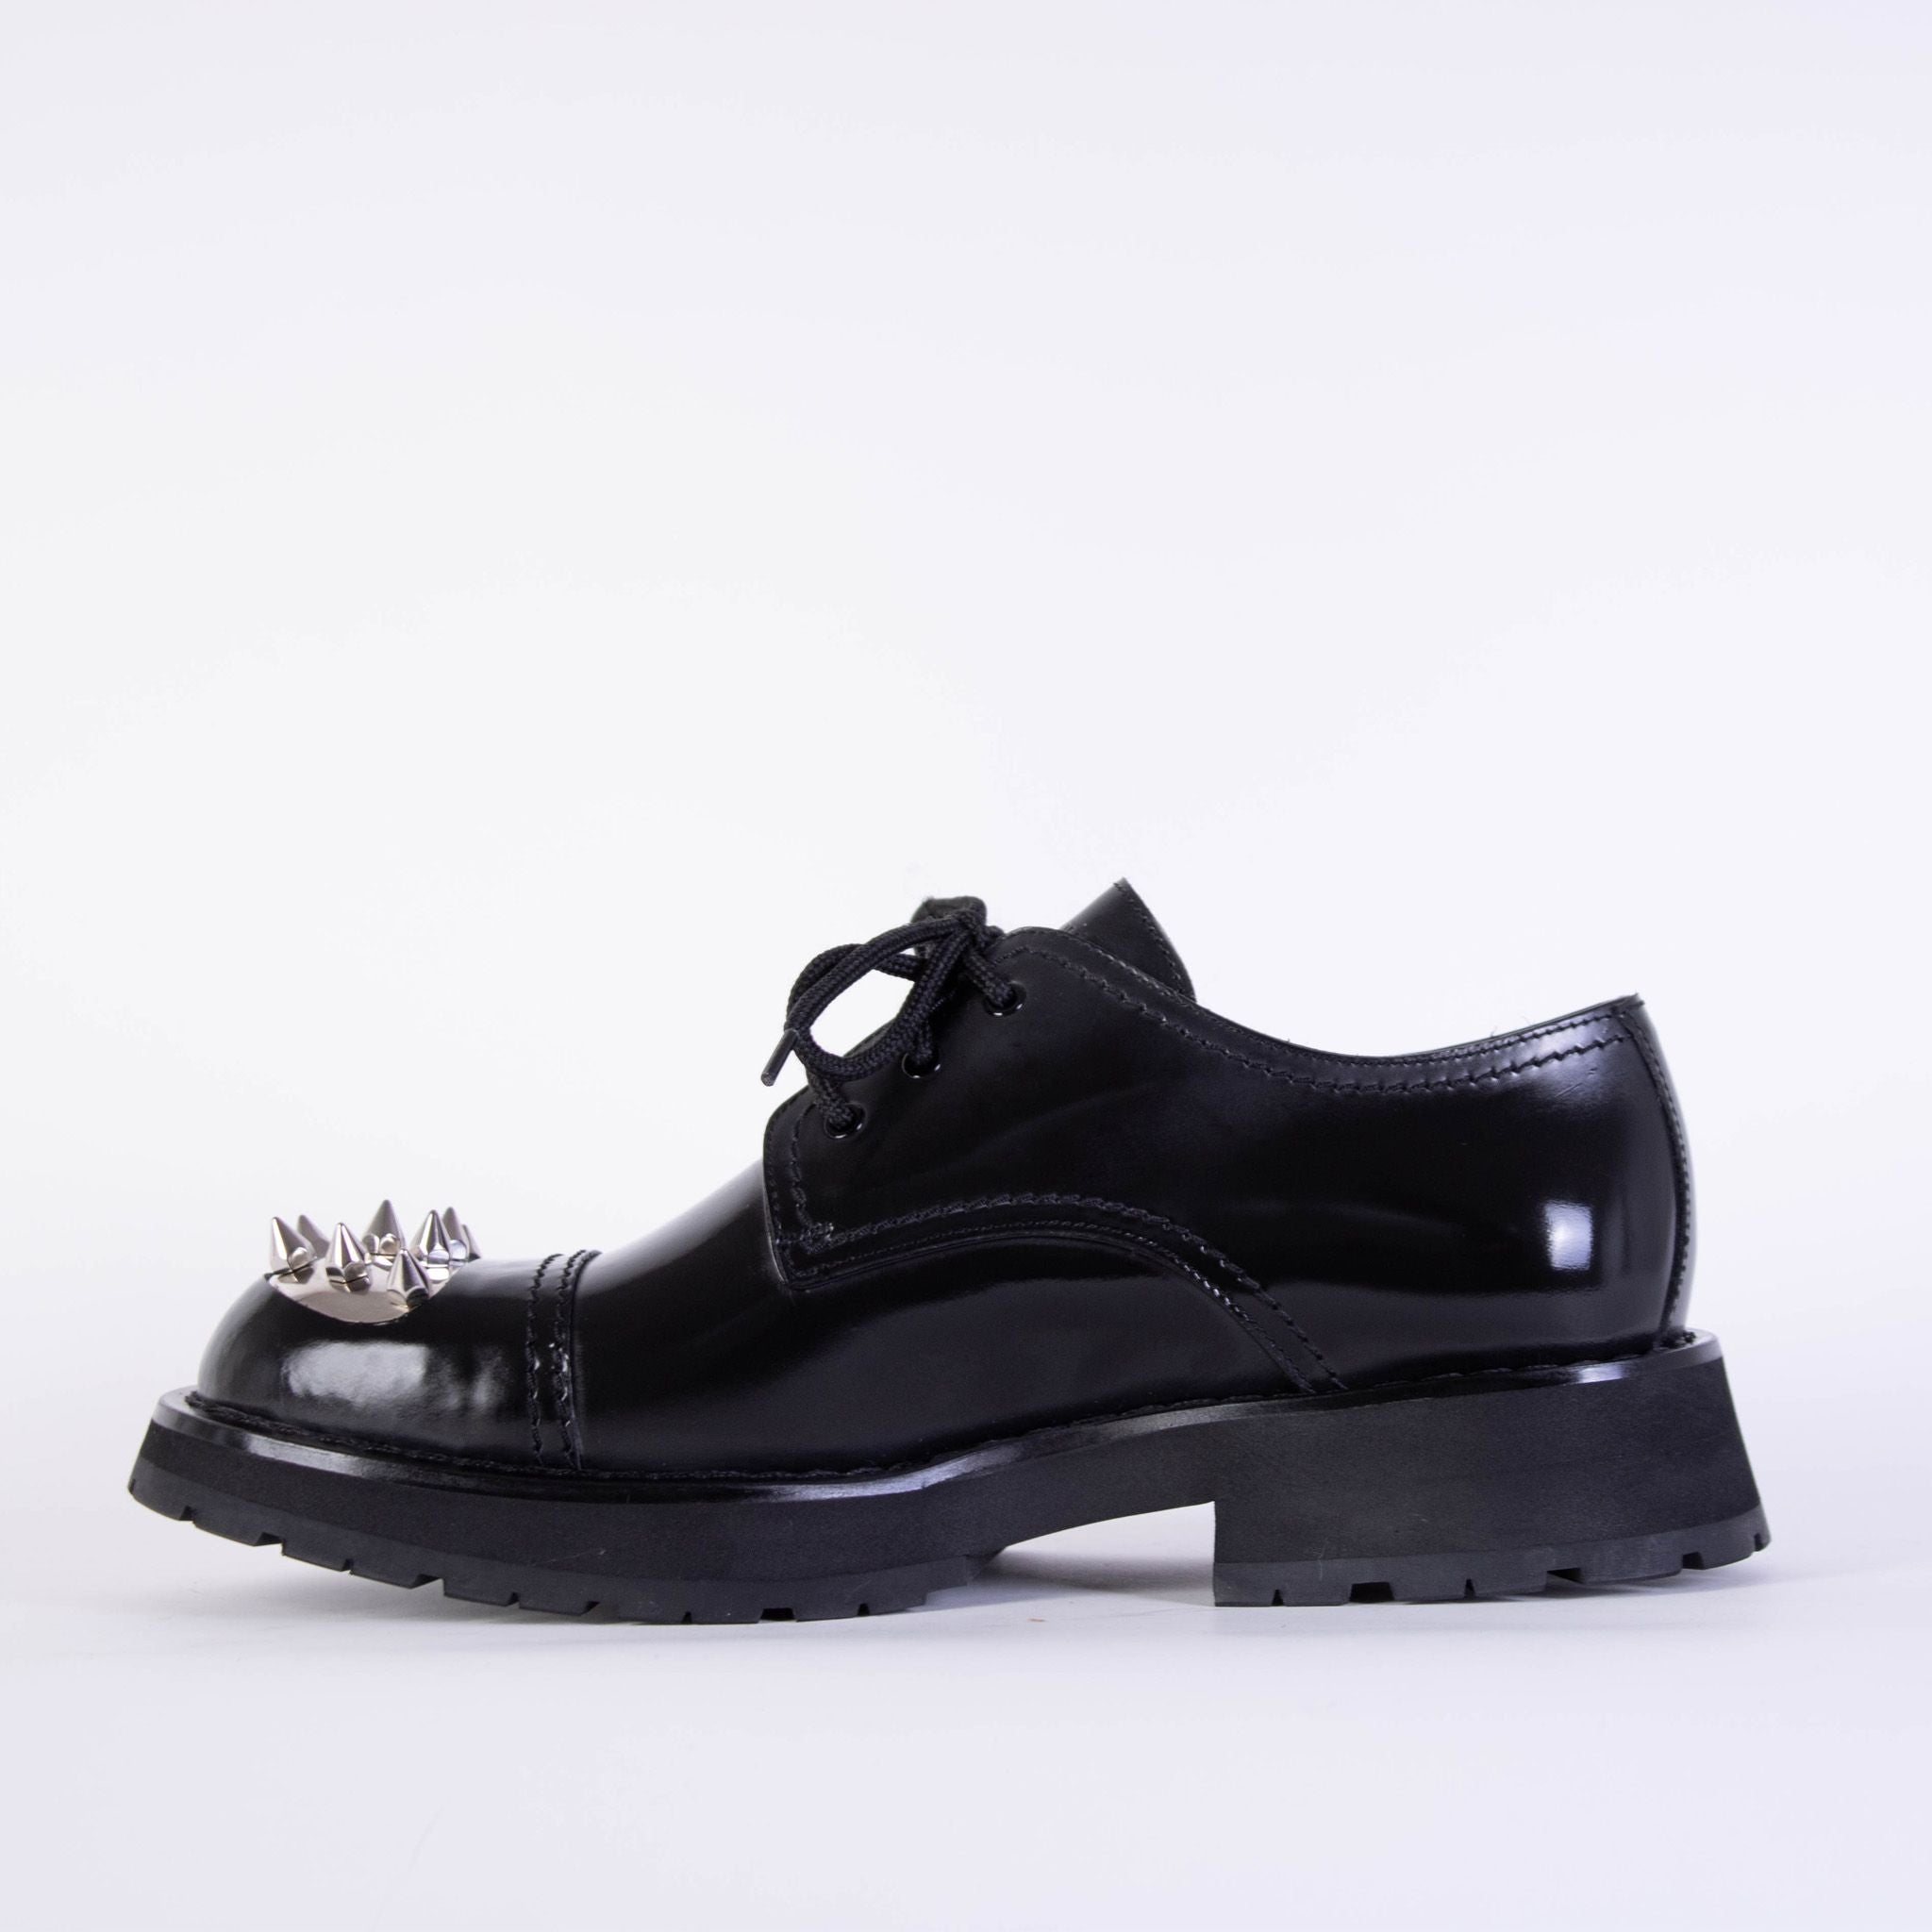 Alexander McQueen Studded Black Leather Derby Shoes